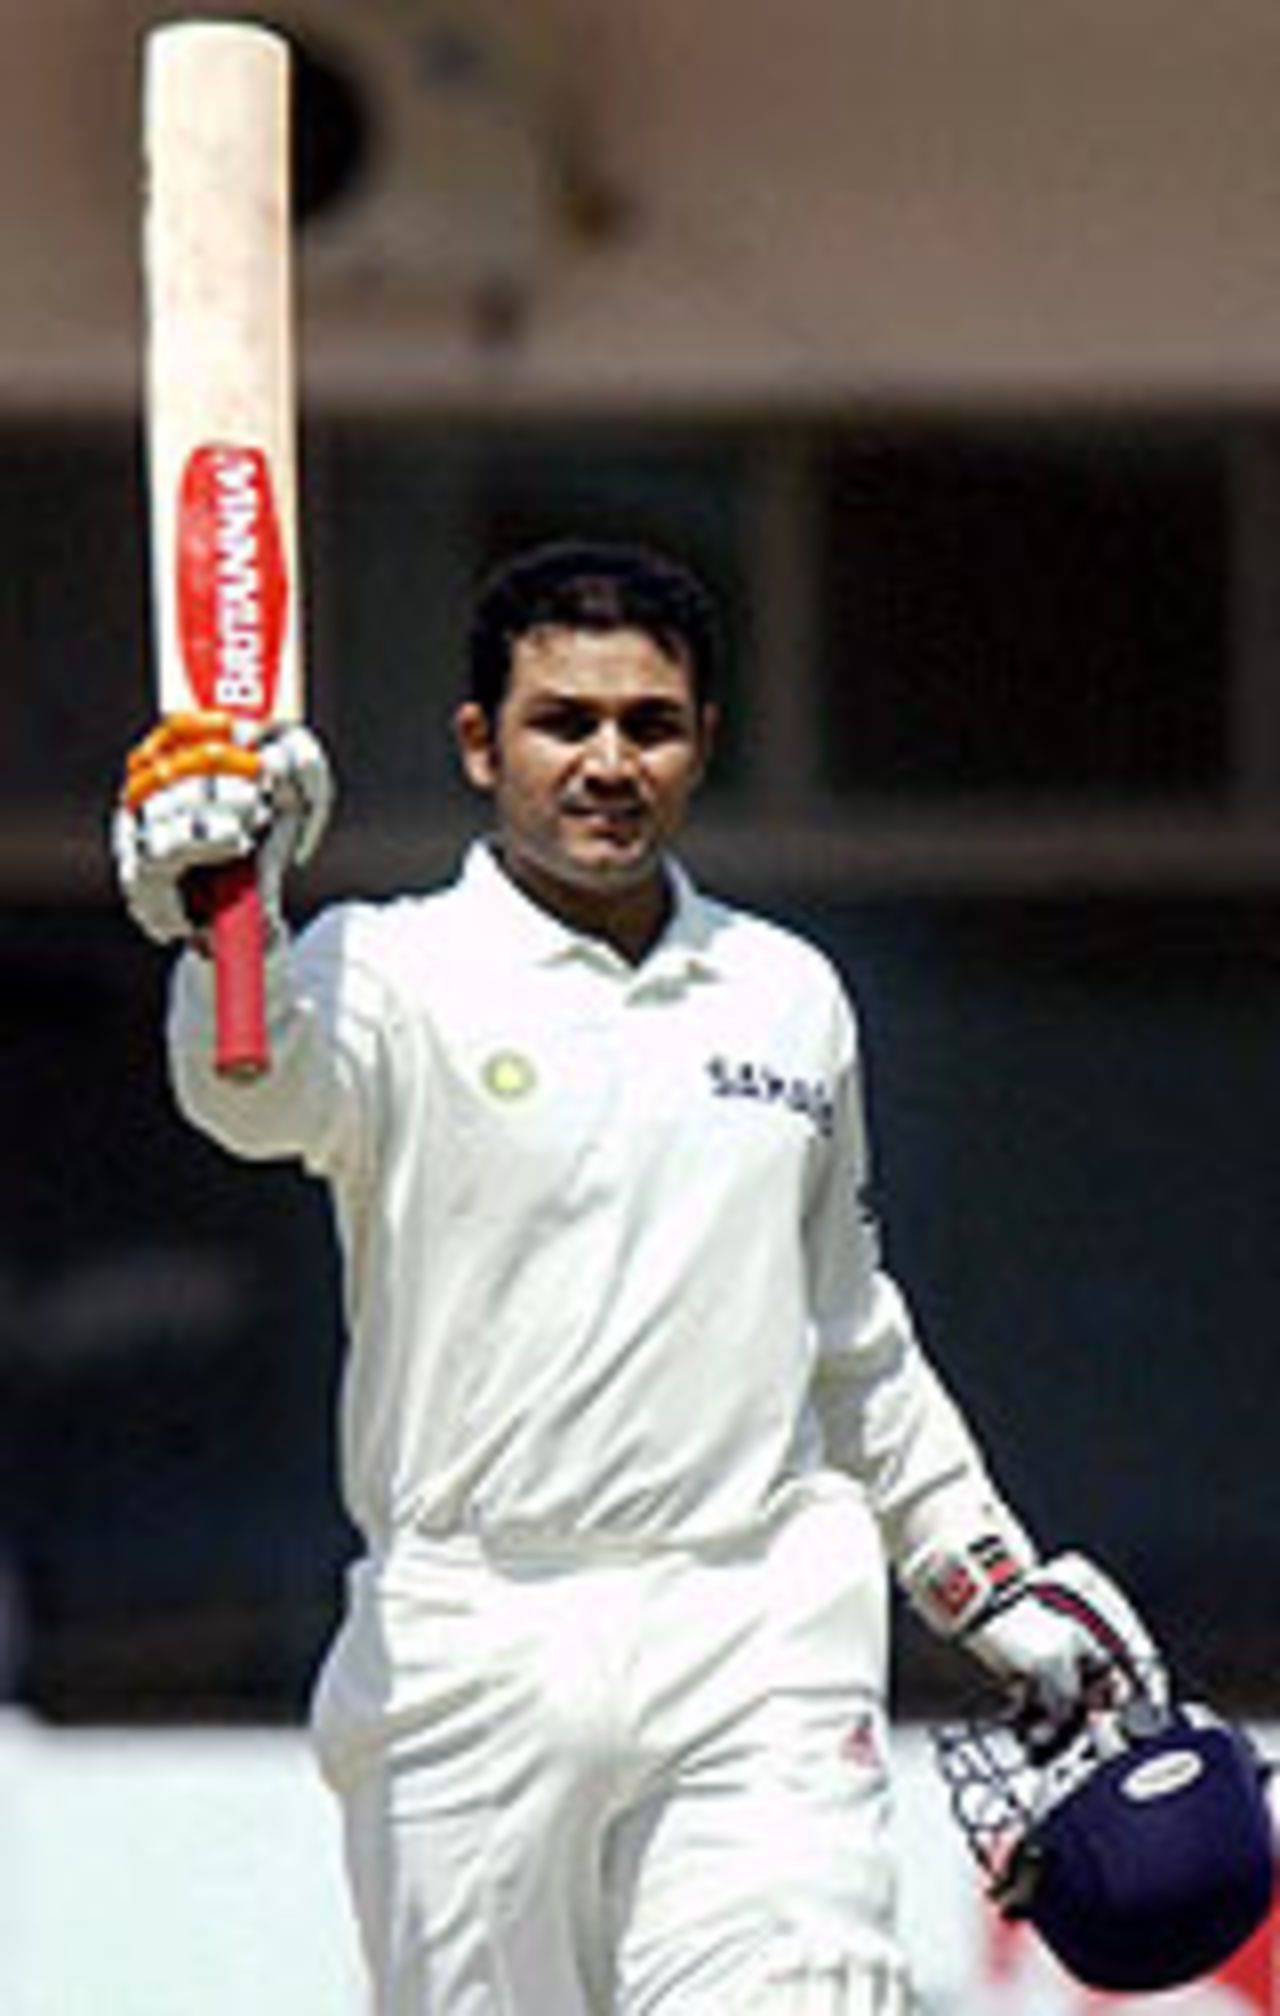 Virender Sehwag acknowledges the applause after reaching his triple-century with a six, Pakistan v India, 1st Test, Multan, 2nd day, March 29, 2004